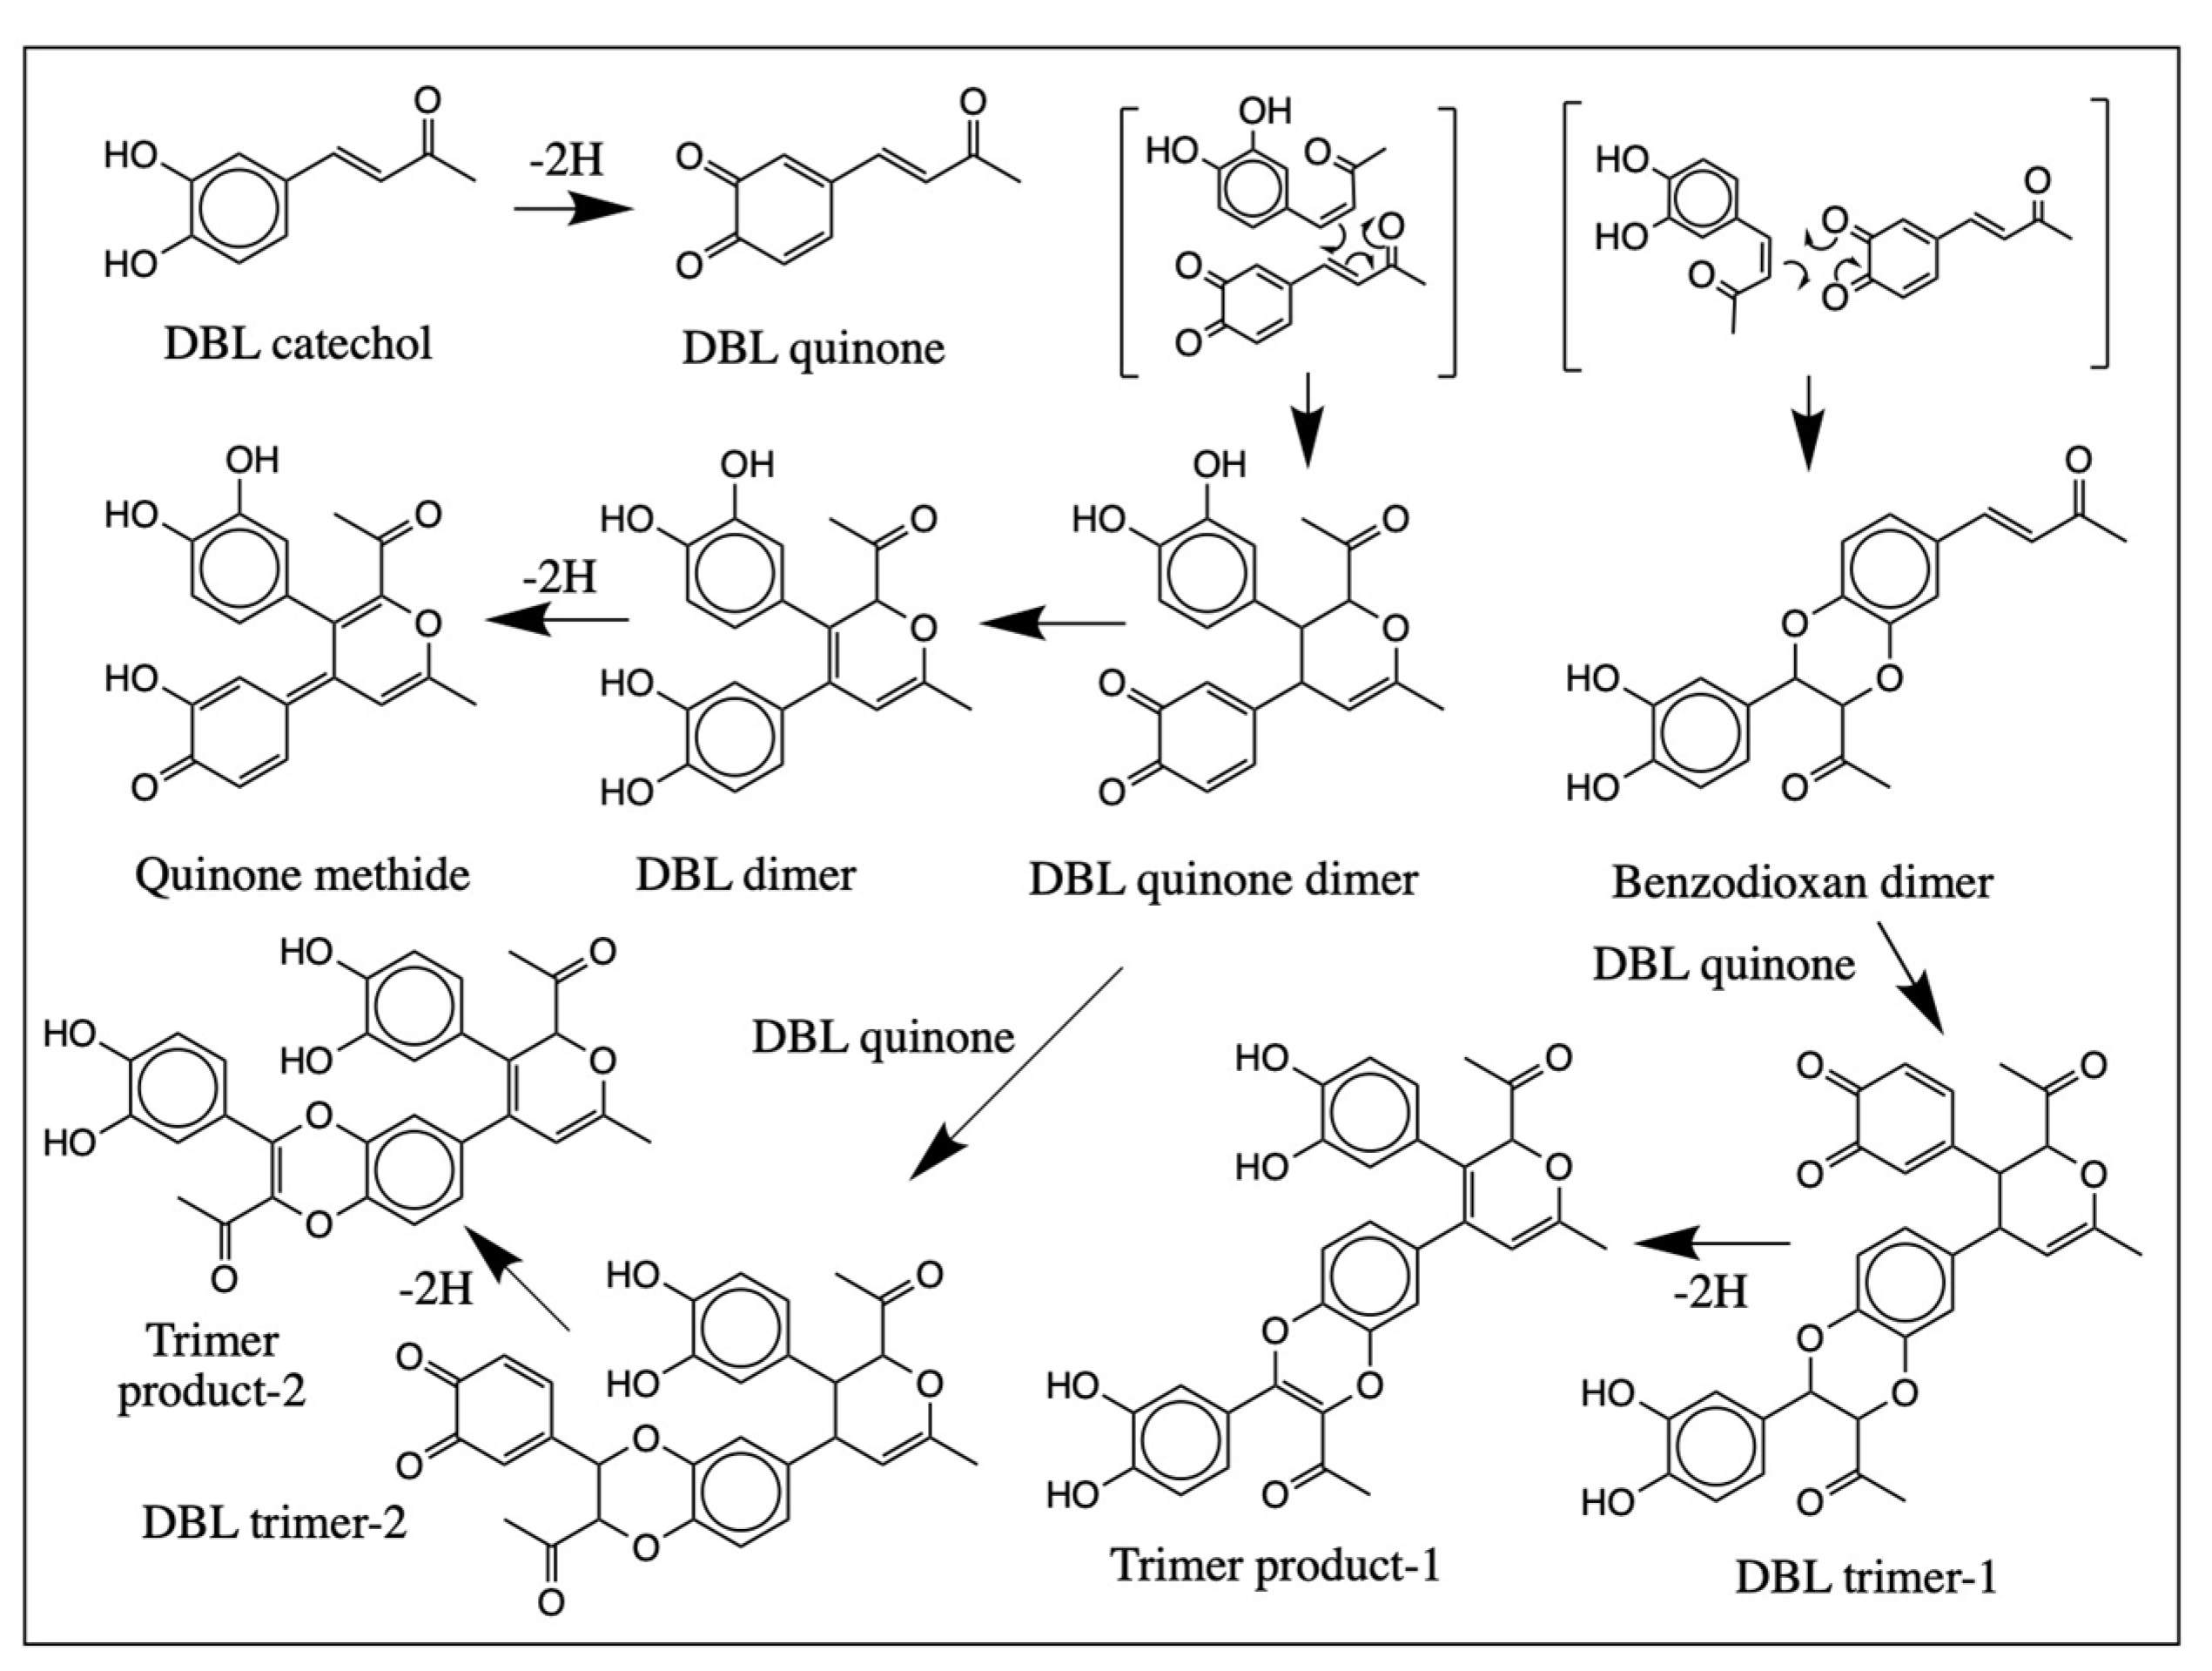 IJMS | Free Full-Text | Oxidative Oligomerization of DBL Catechol, a  potential Cytotoxic Compound for Melanocytes, Reveals the Occurrence of  Novel Ionic Diels-Alder Type Additions | HTML